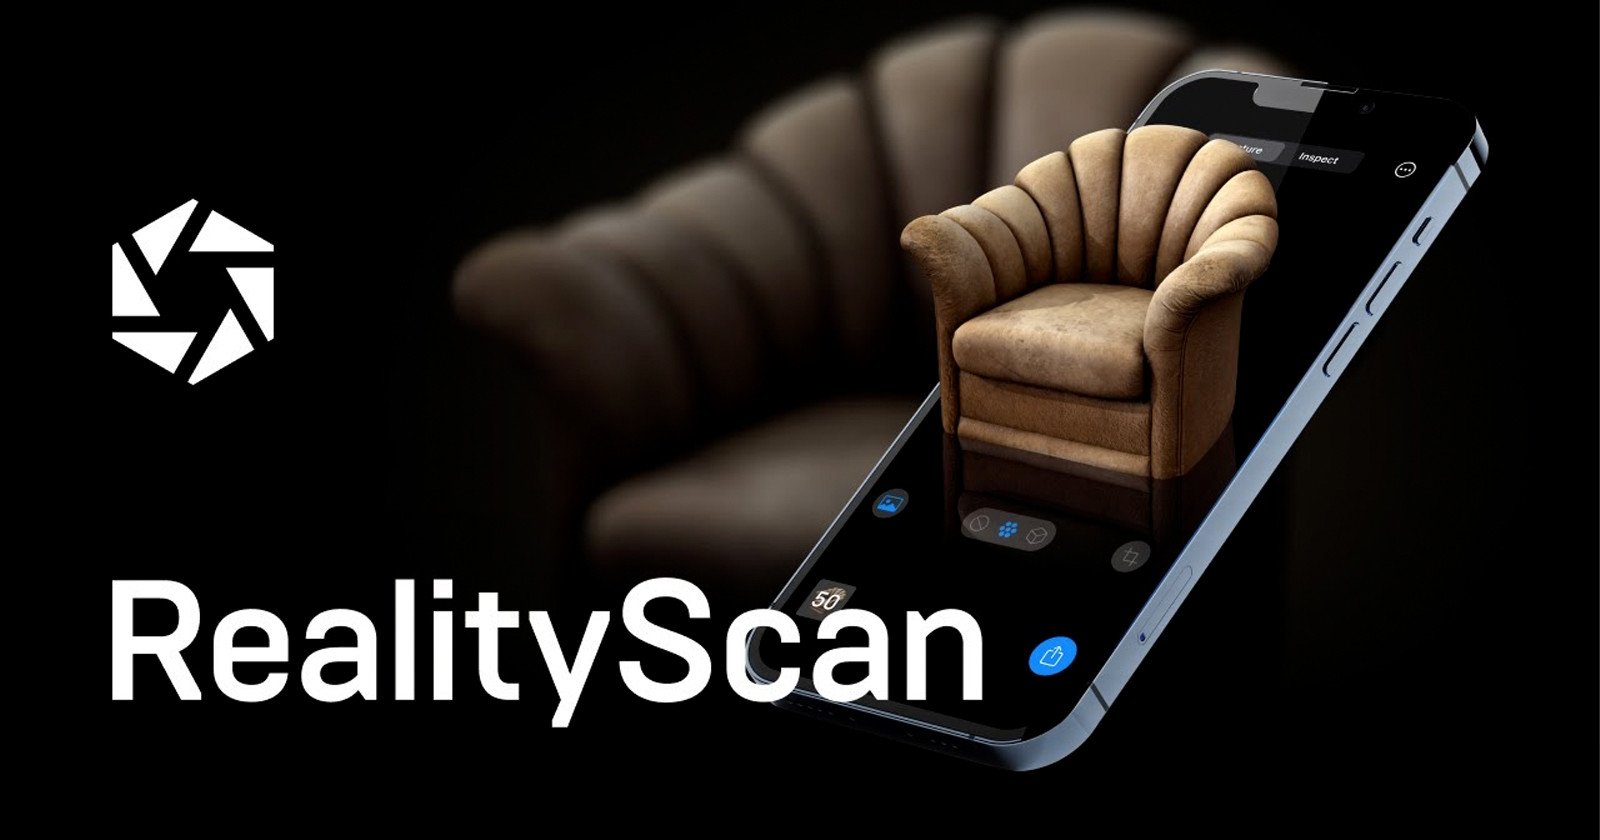 The RealityScan App Can Quickly Turn iPhone Photos into 3D Models